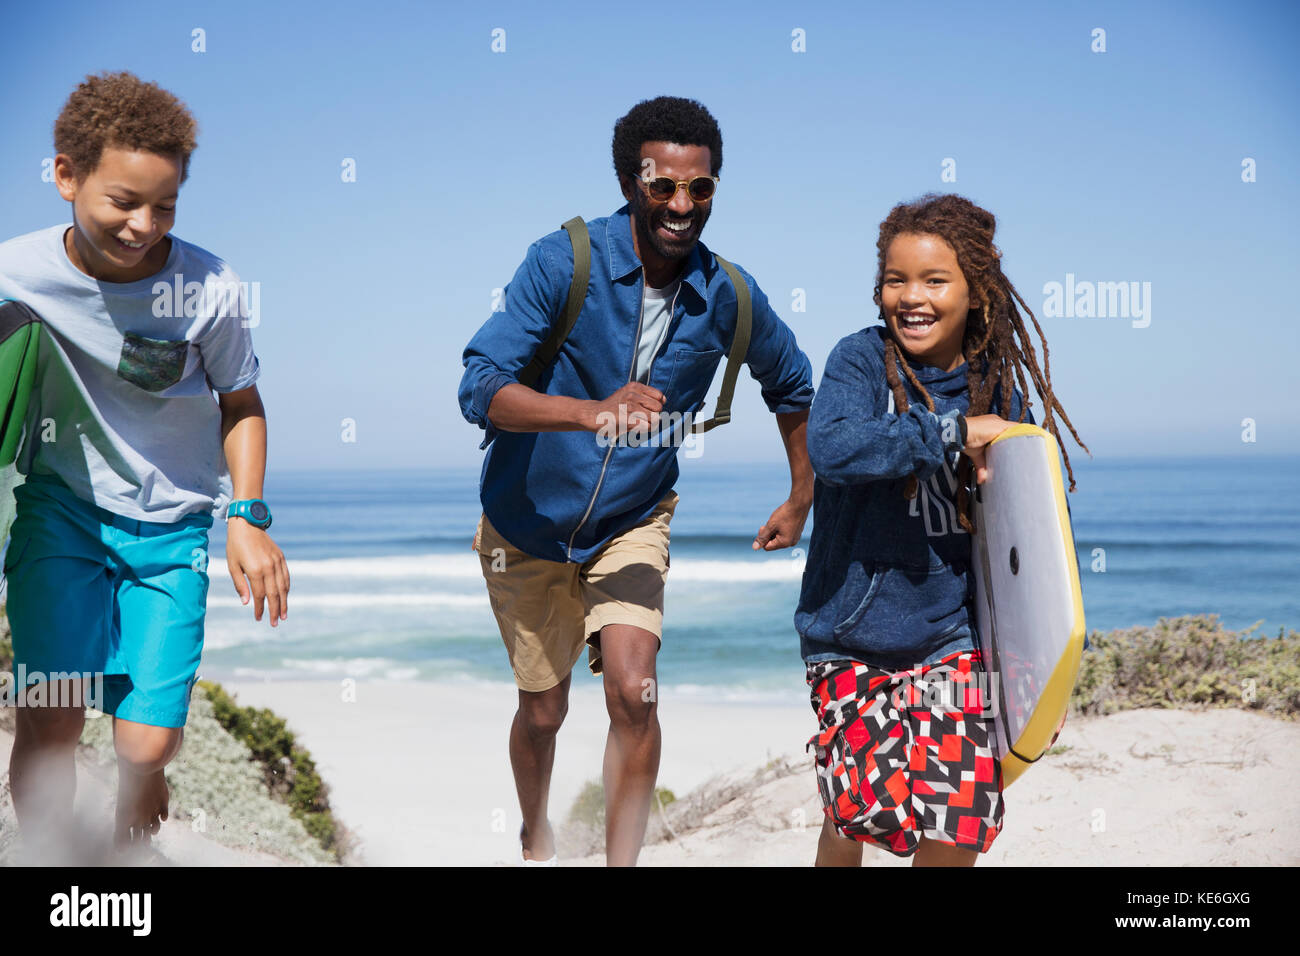 Playful family with boogie board running on sunny summer beach Stock Photo